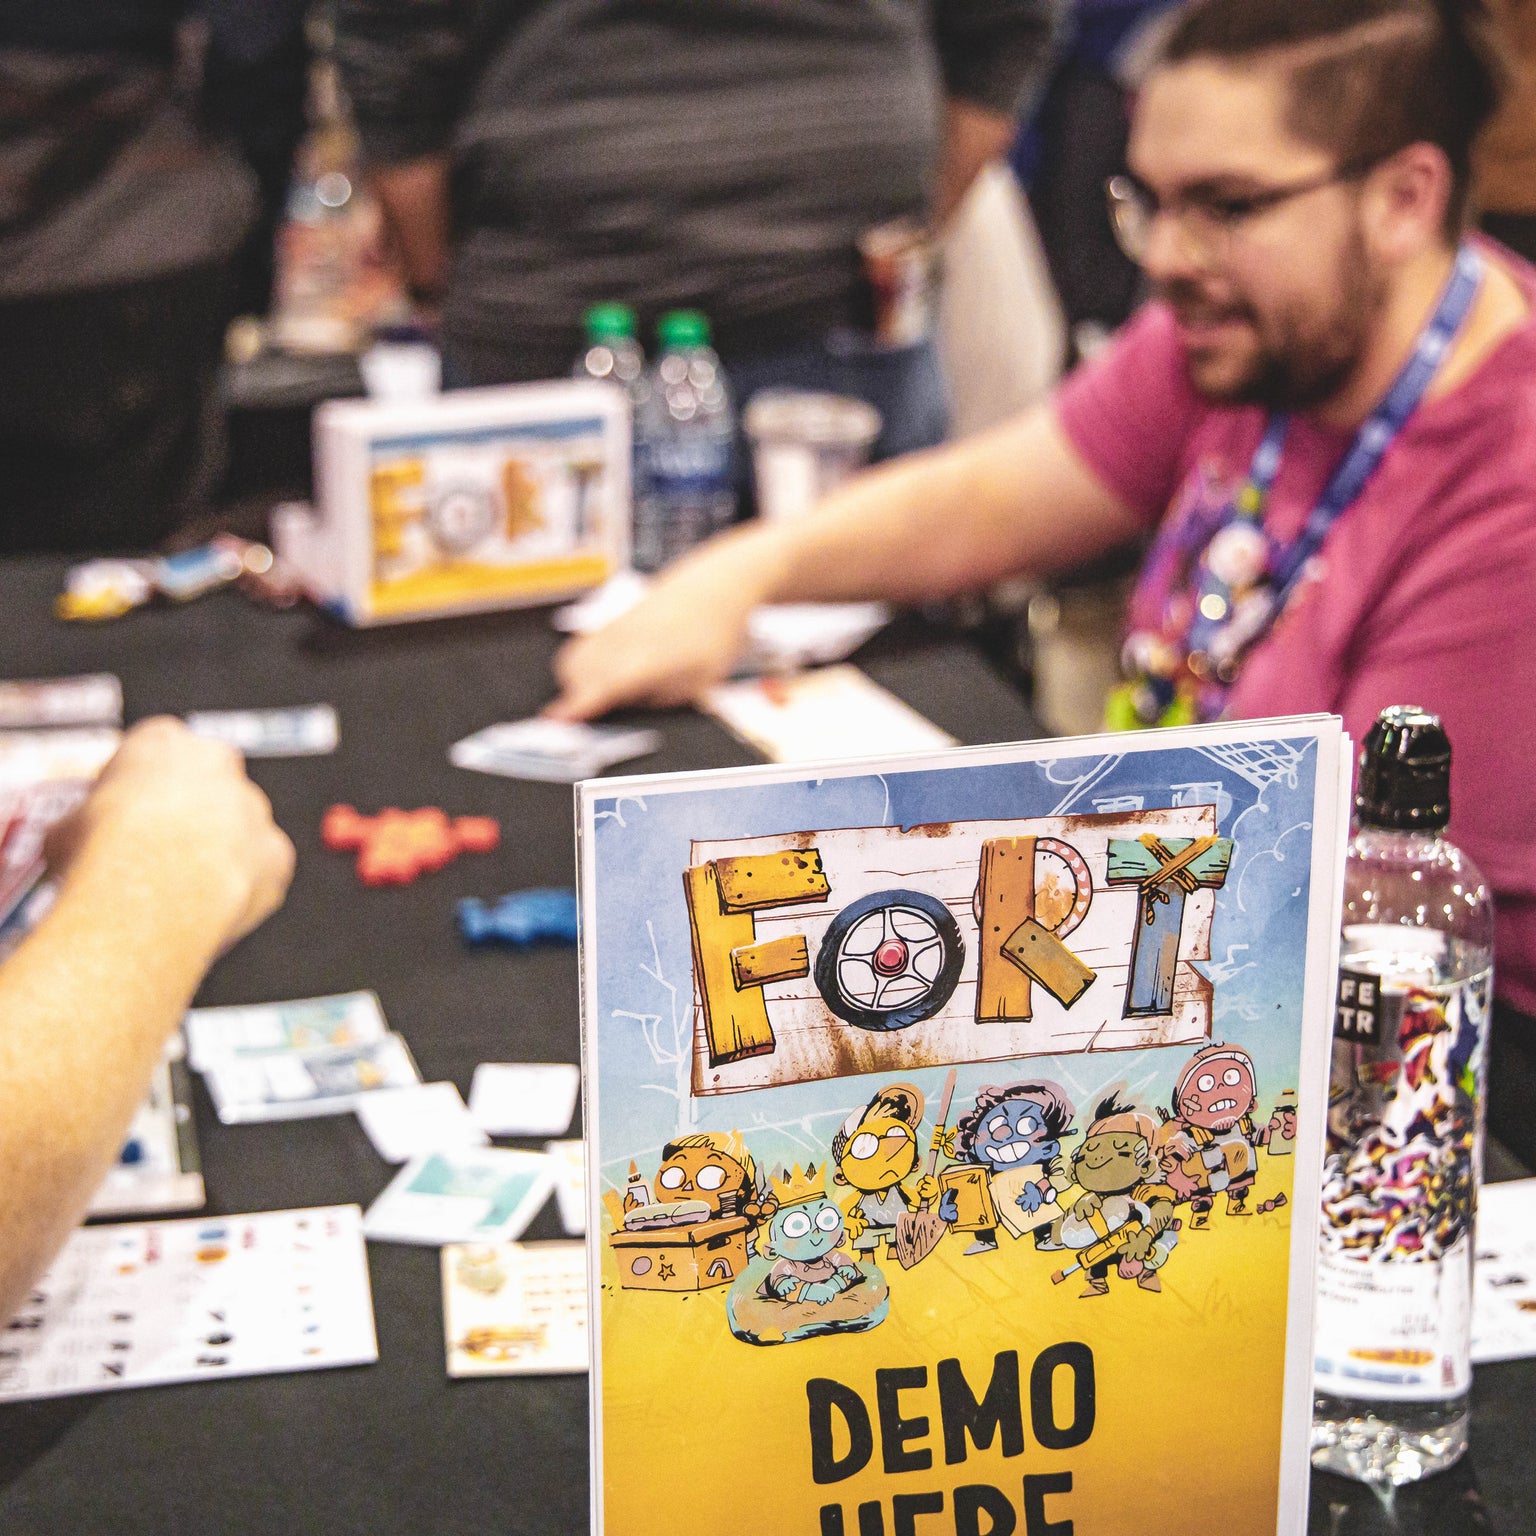 Leder Games employee demoing Fort at a convention